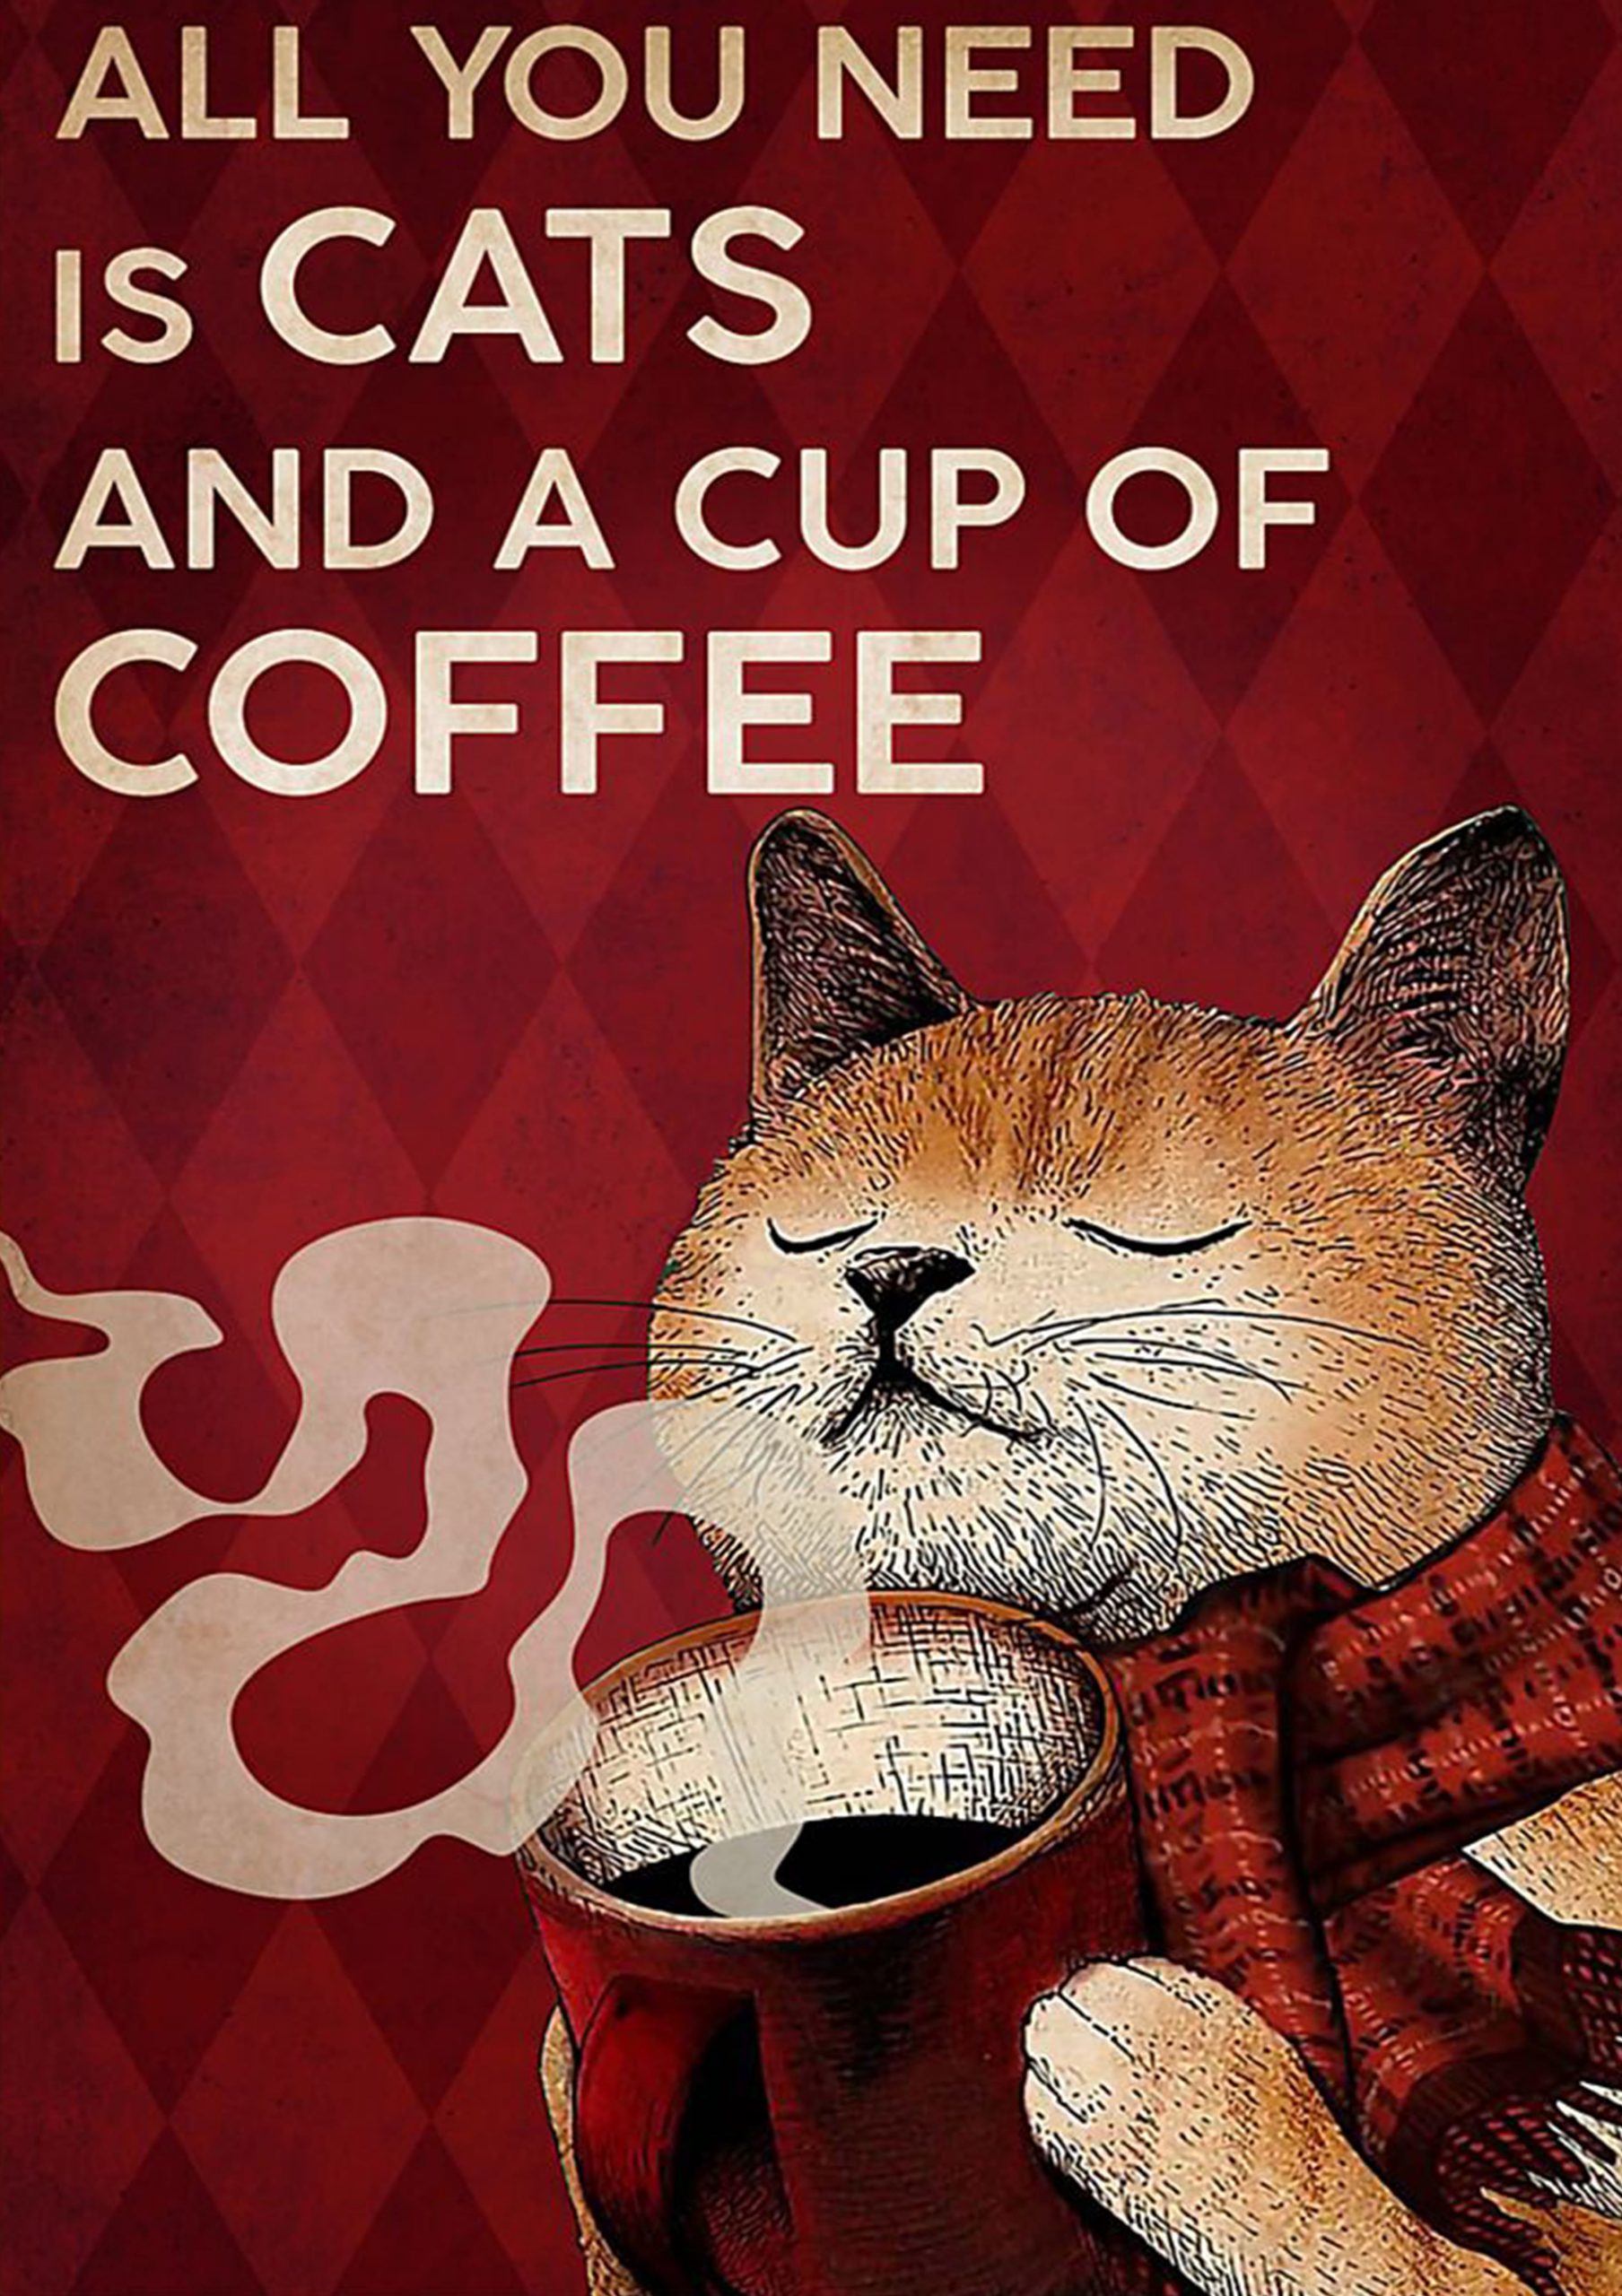 vintage all you need is cats and a cup of coffee poster 1